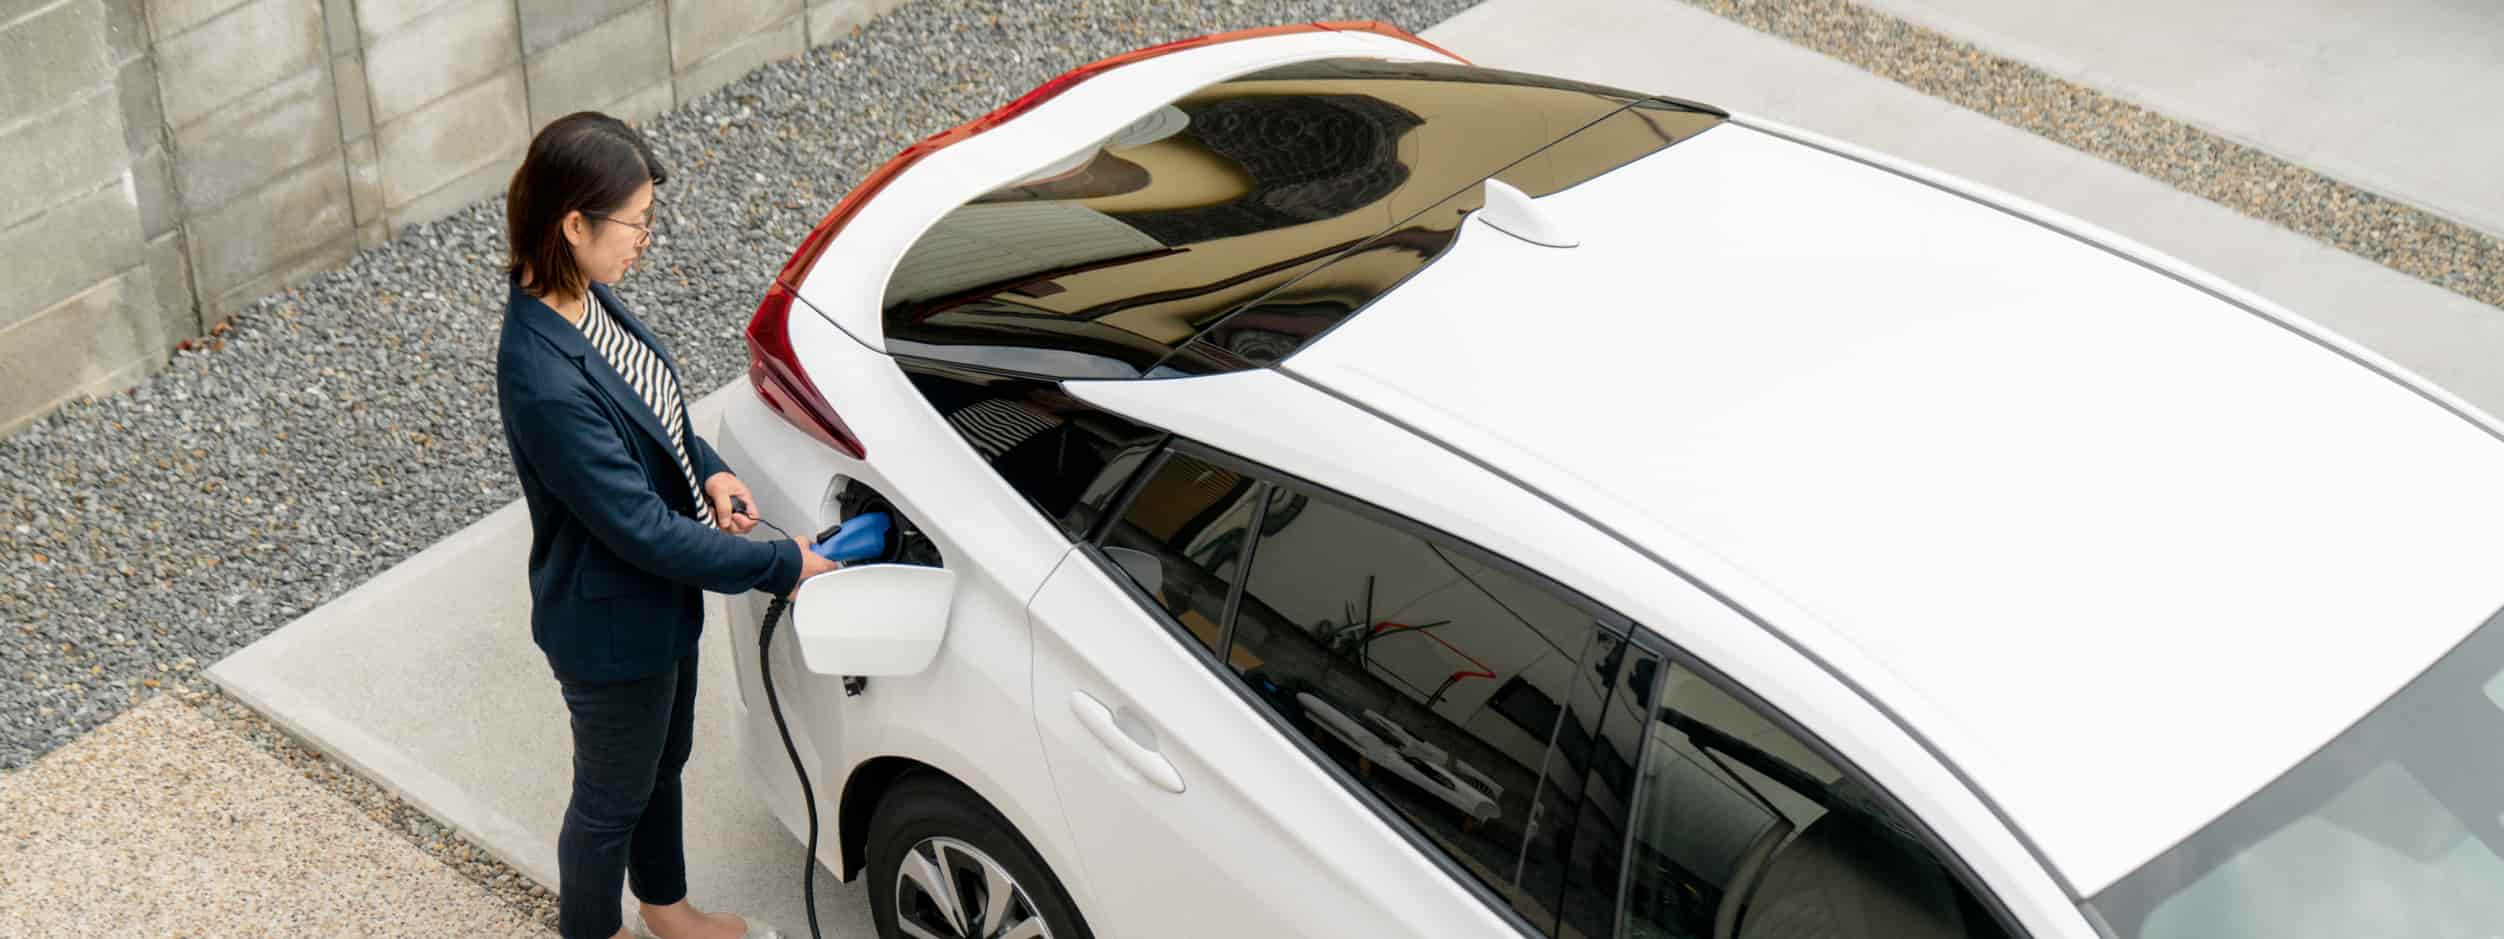 A woman plugs in her EV at home.